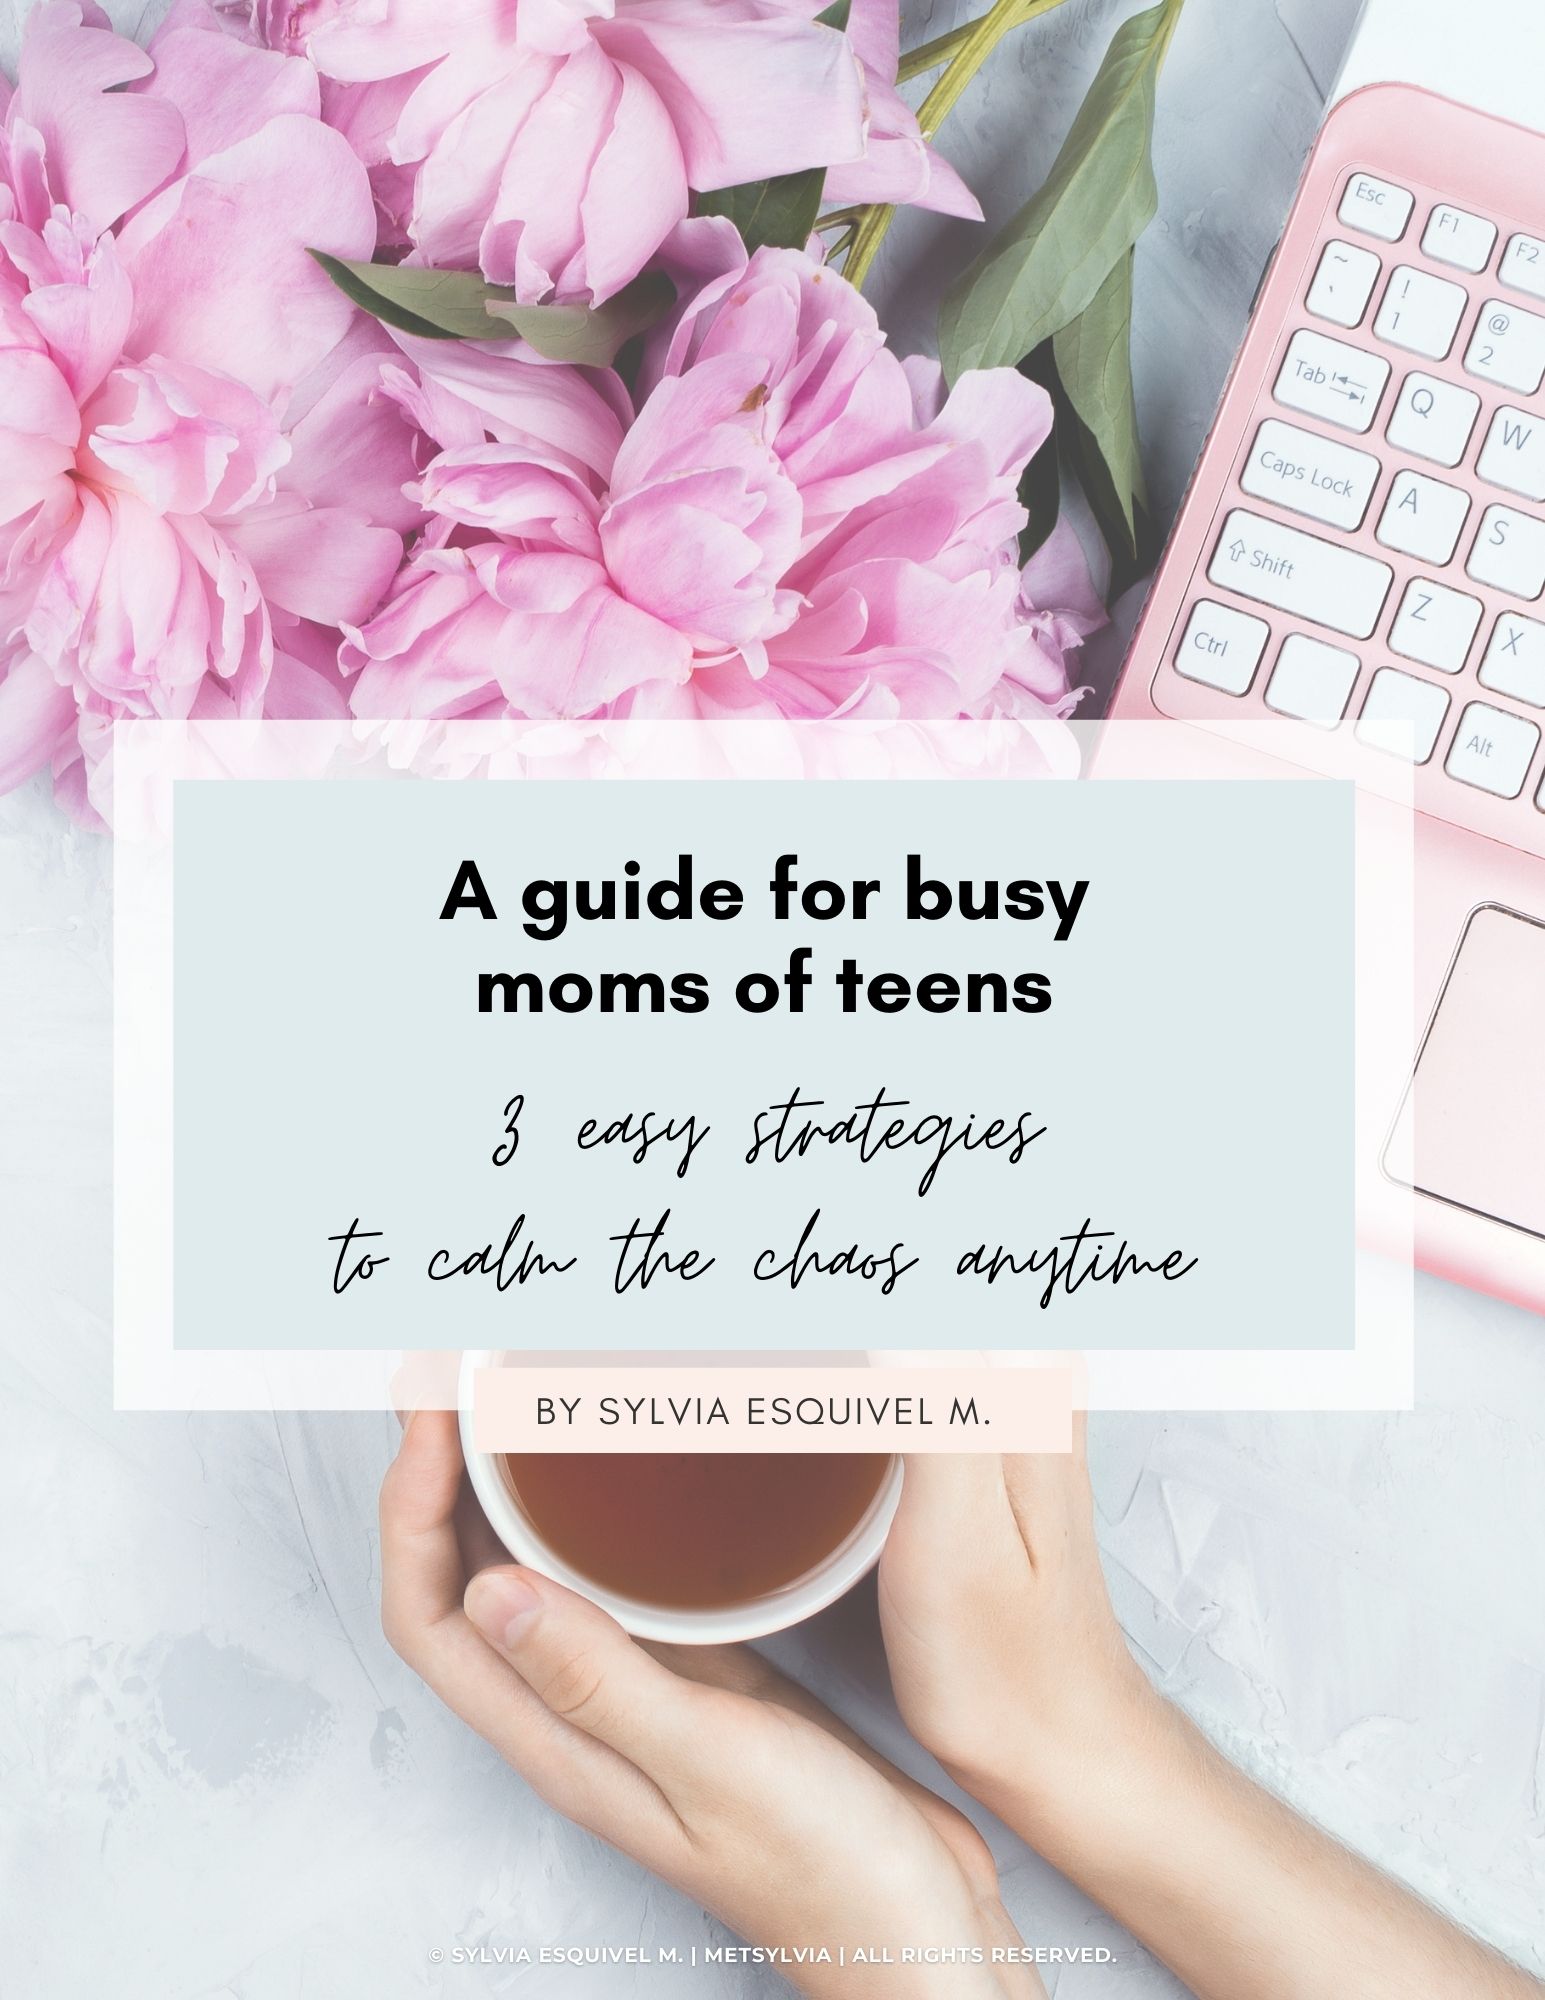 FREE Guide for busy moms of teens